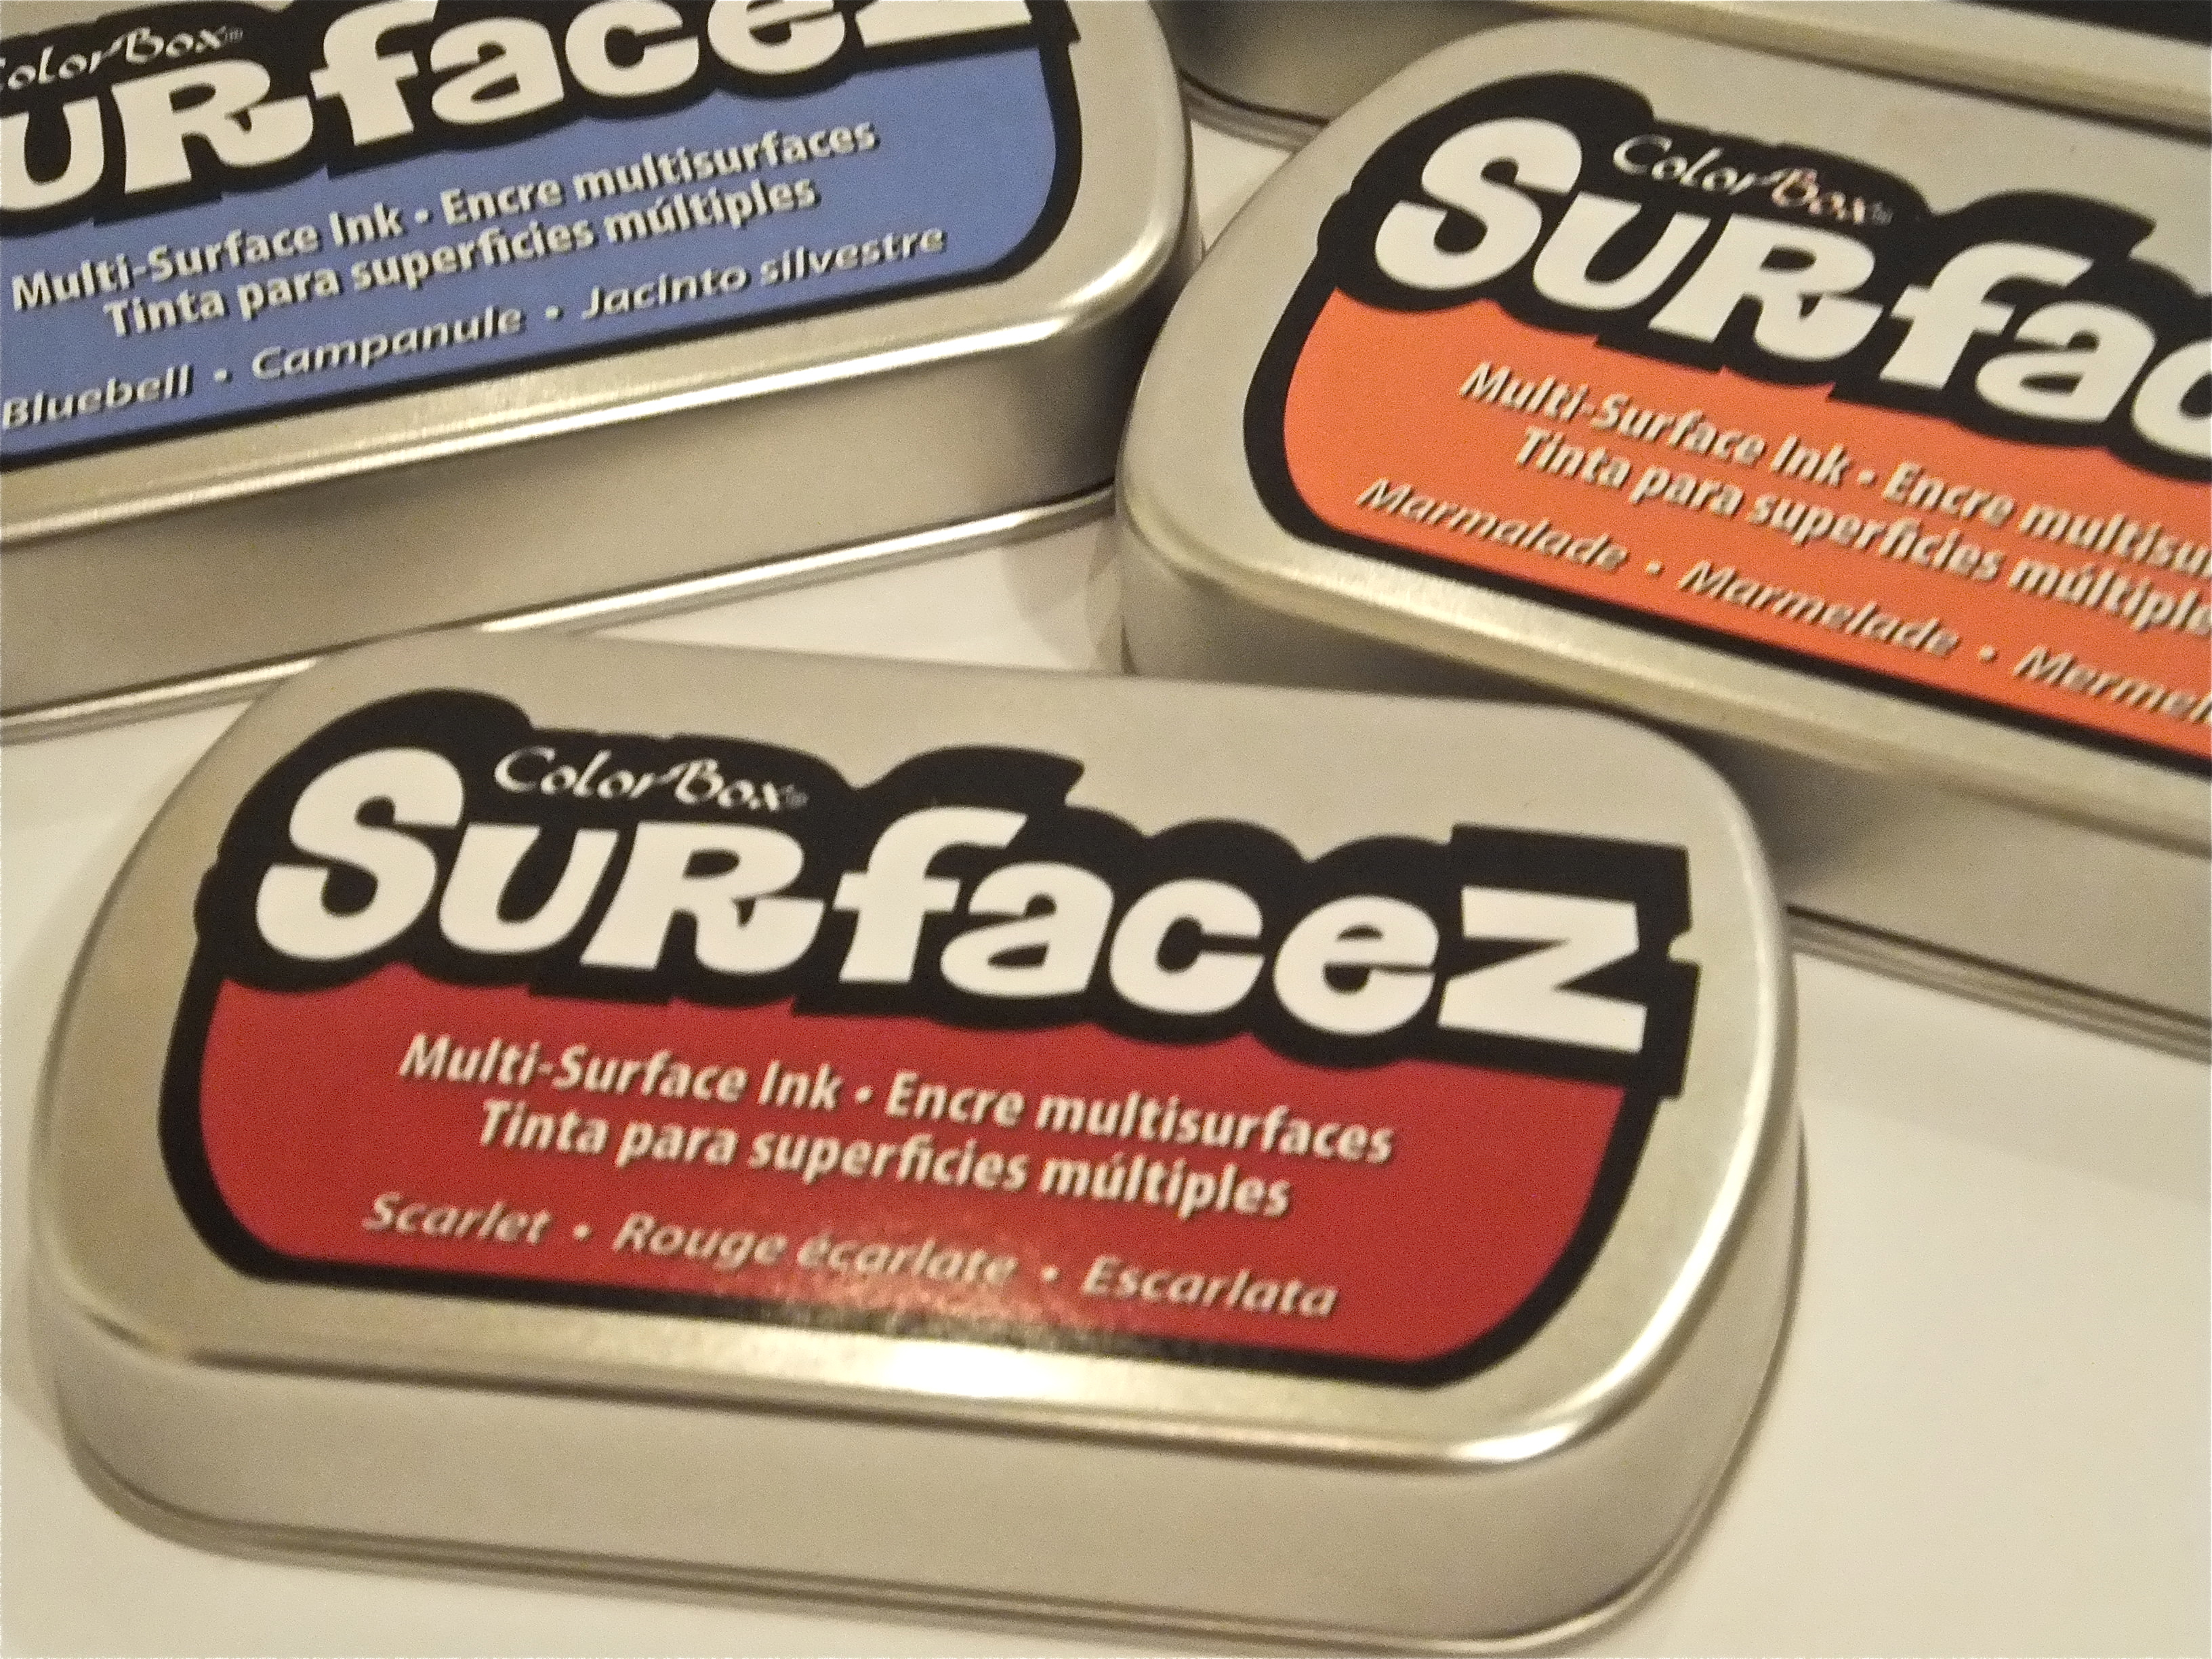 Monday Morning Review: Surfacez Inks from Clearsnap